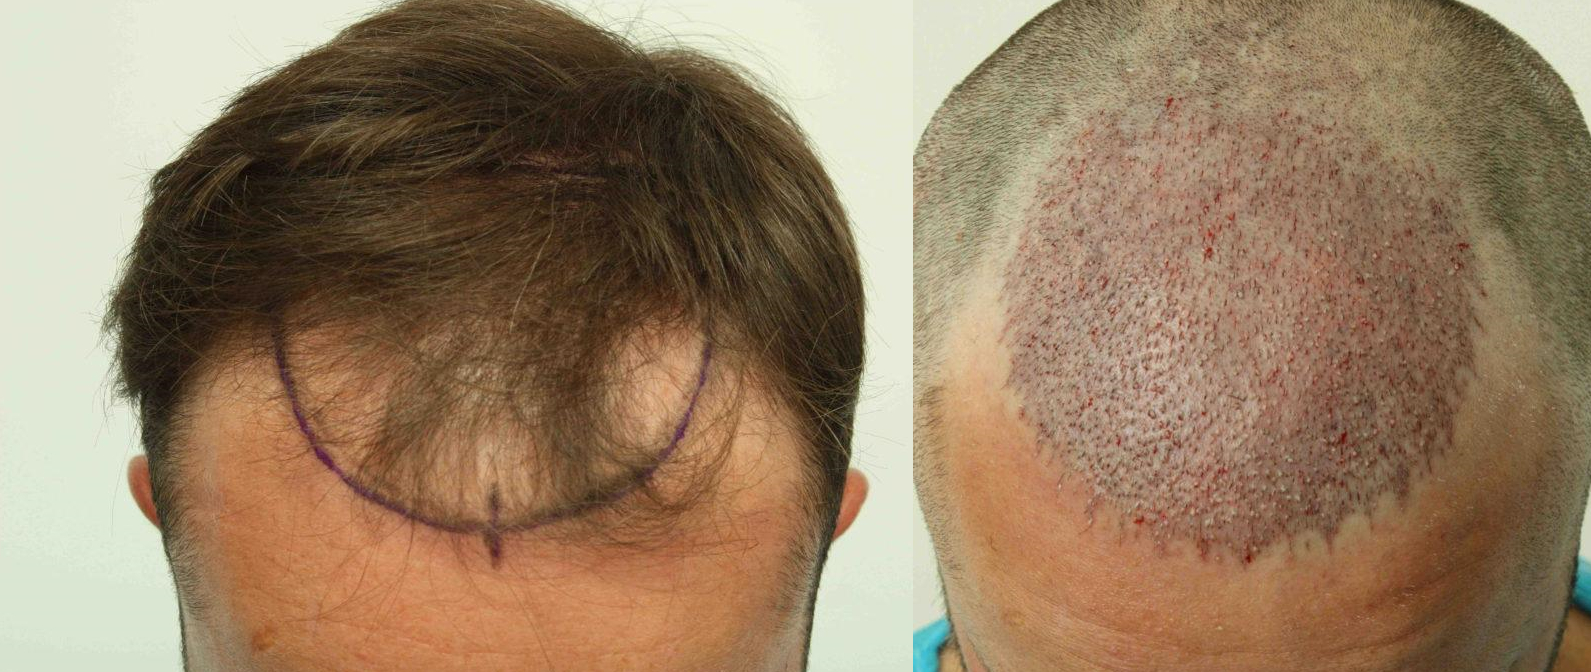 Before hair transplant and Day 0 post-hair transplant on the day of surgery